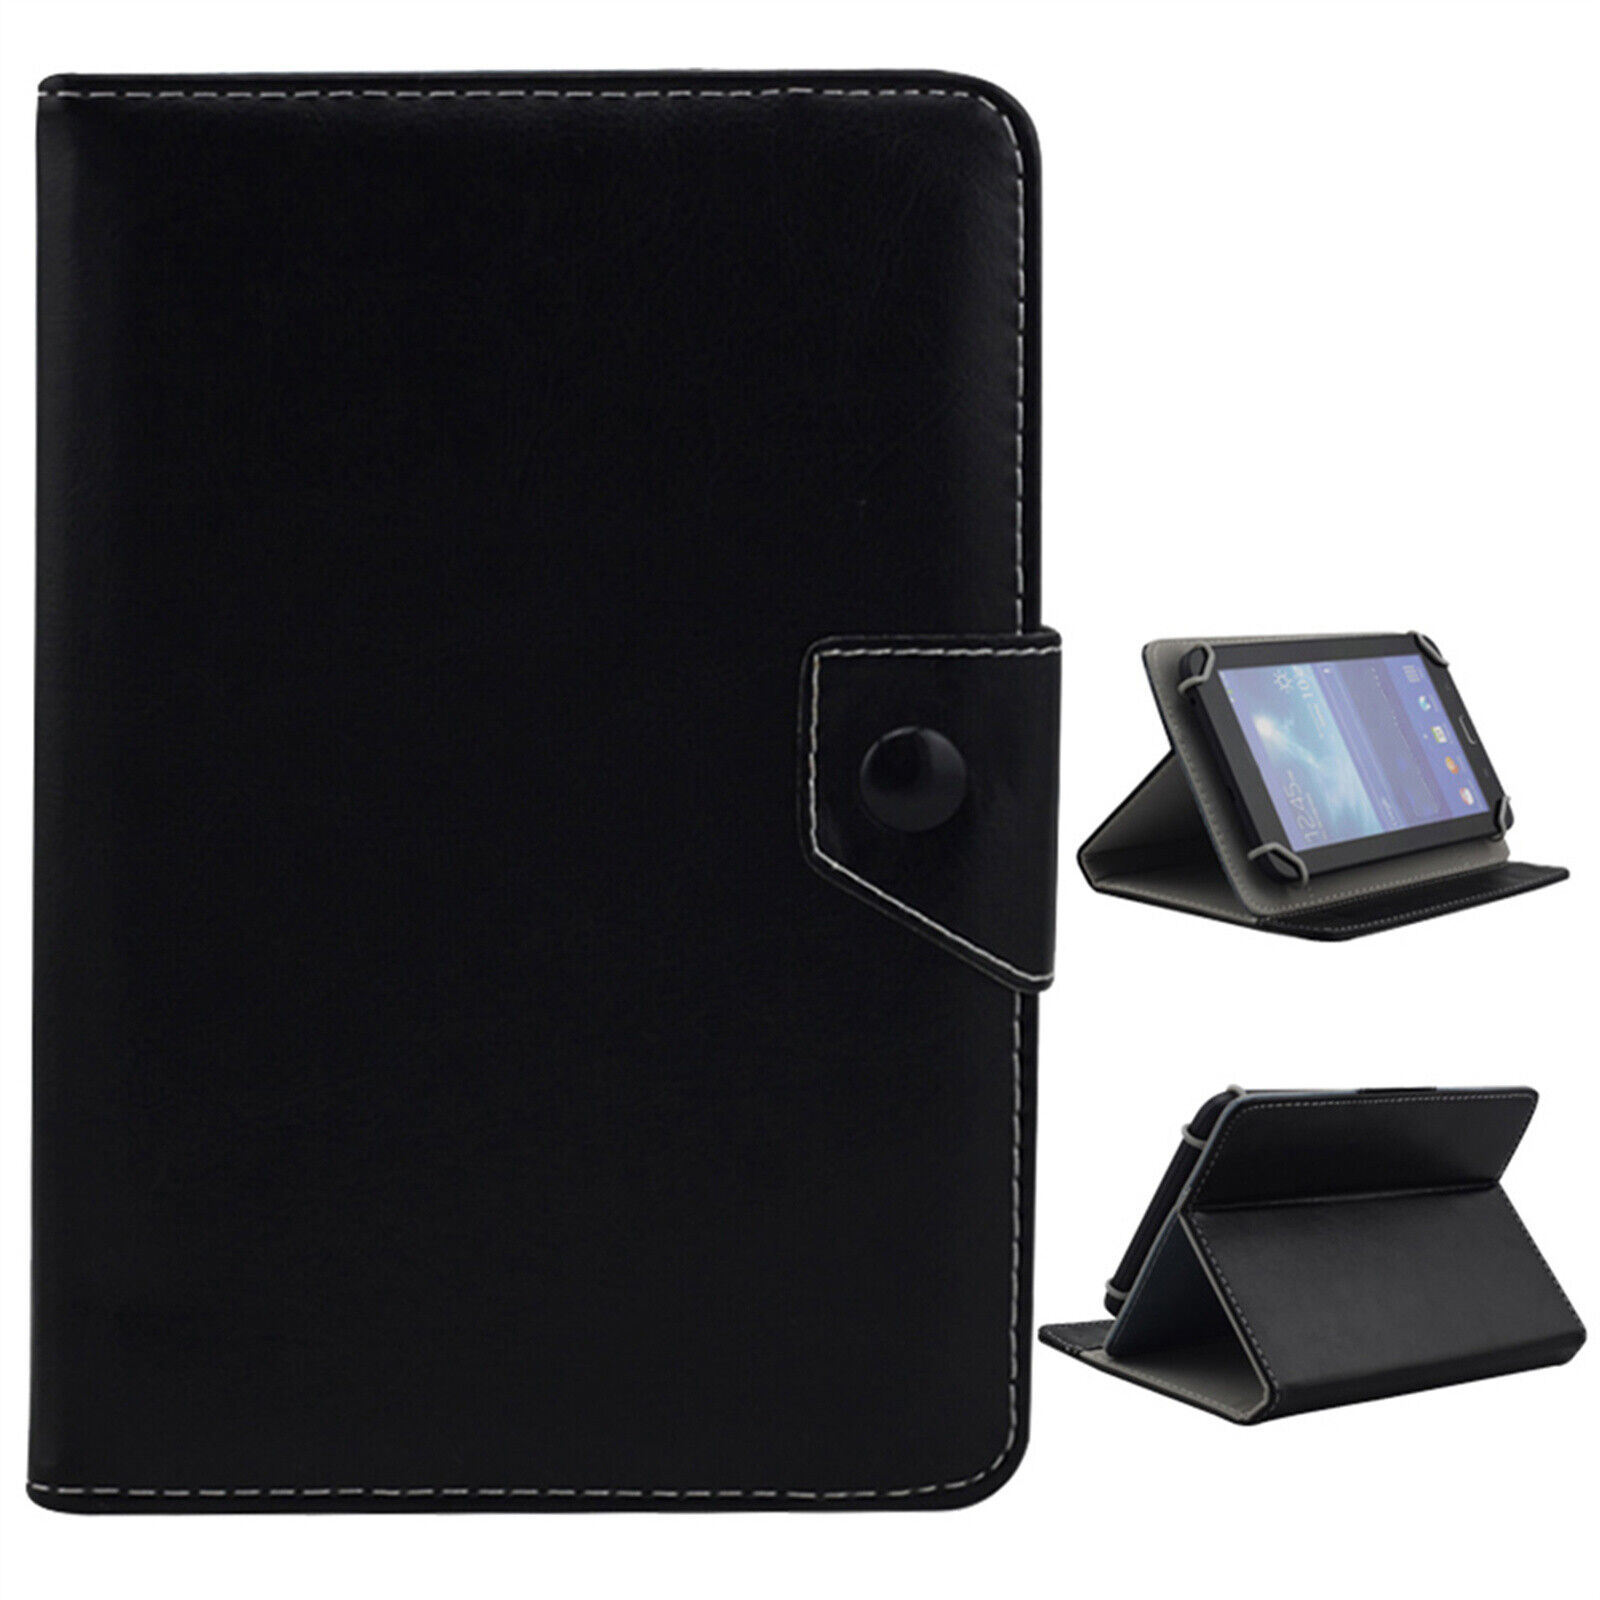 For 7/8/10 inch tablet Universal Leather Case Folio Tablet Cover Protective Case